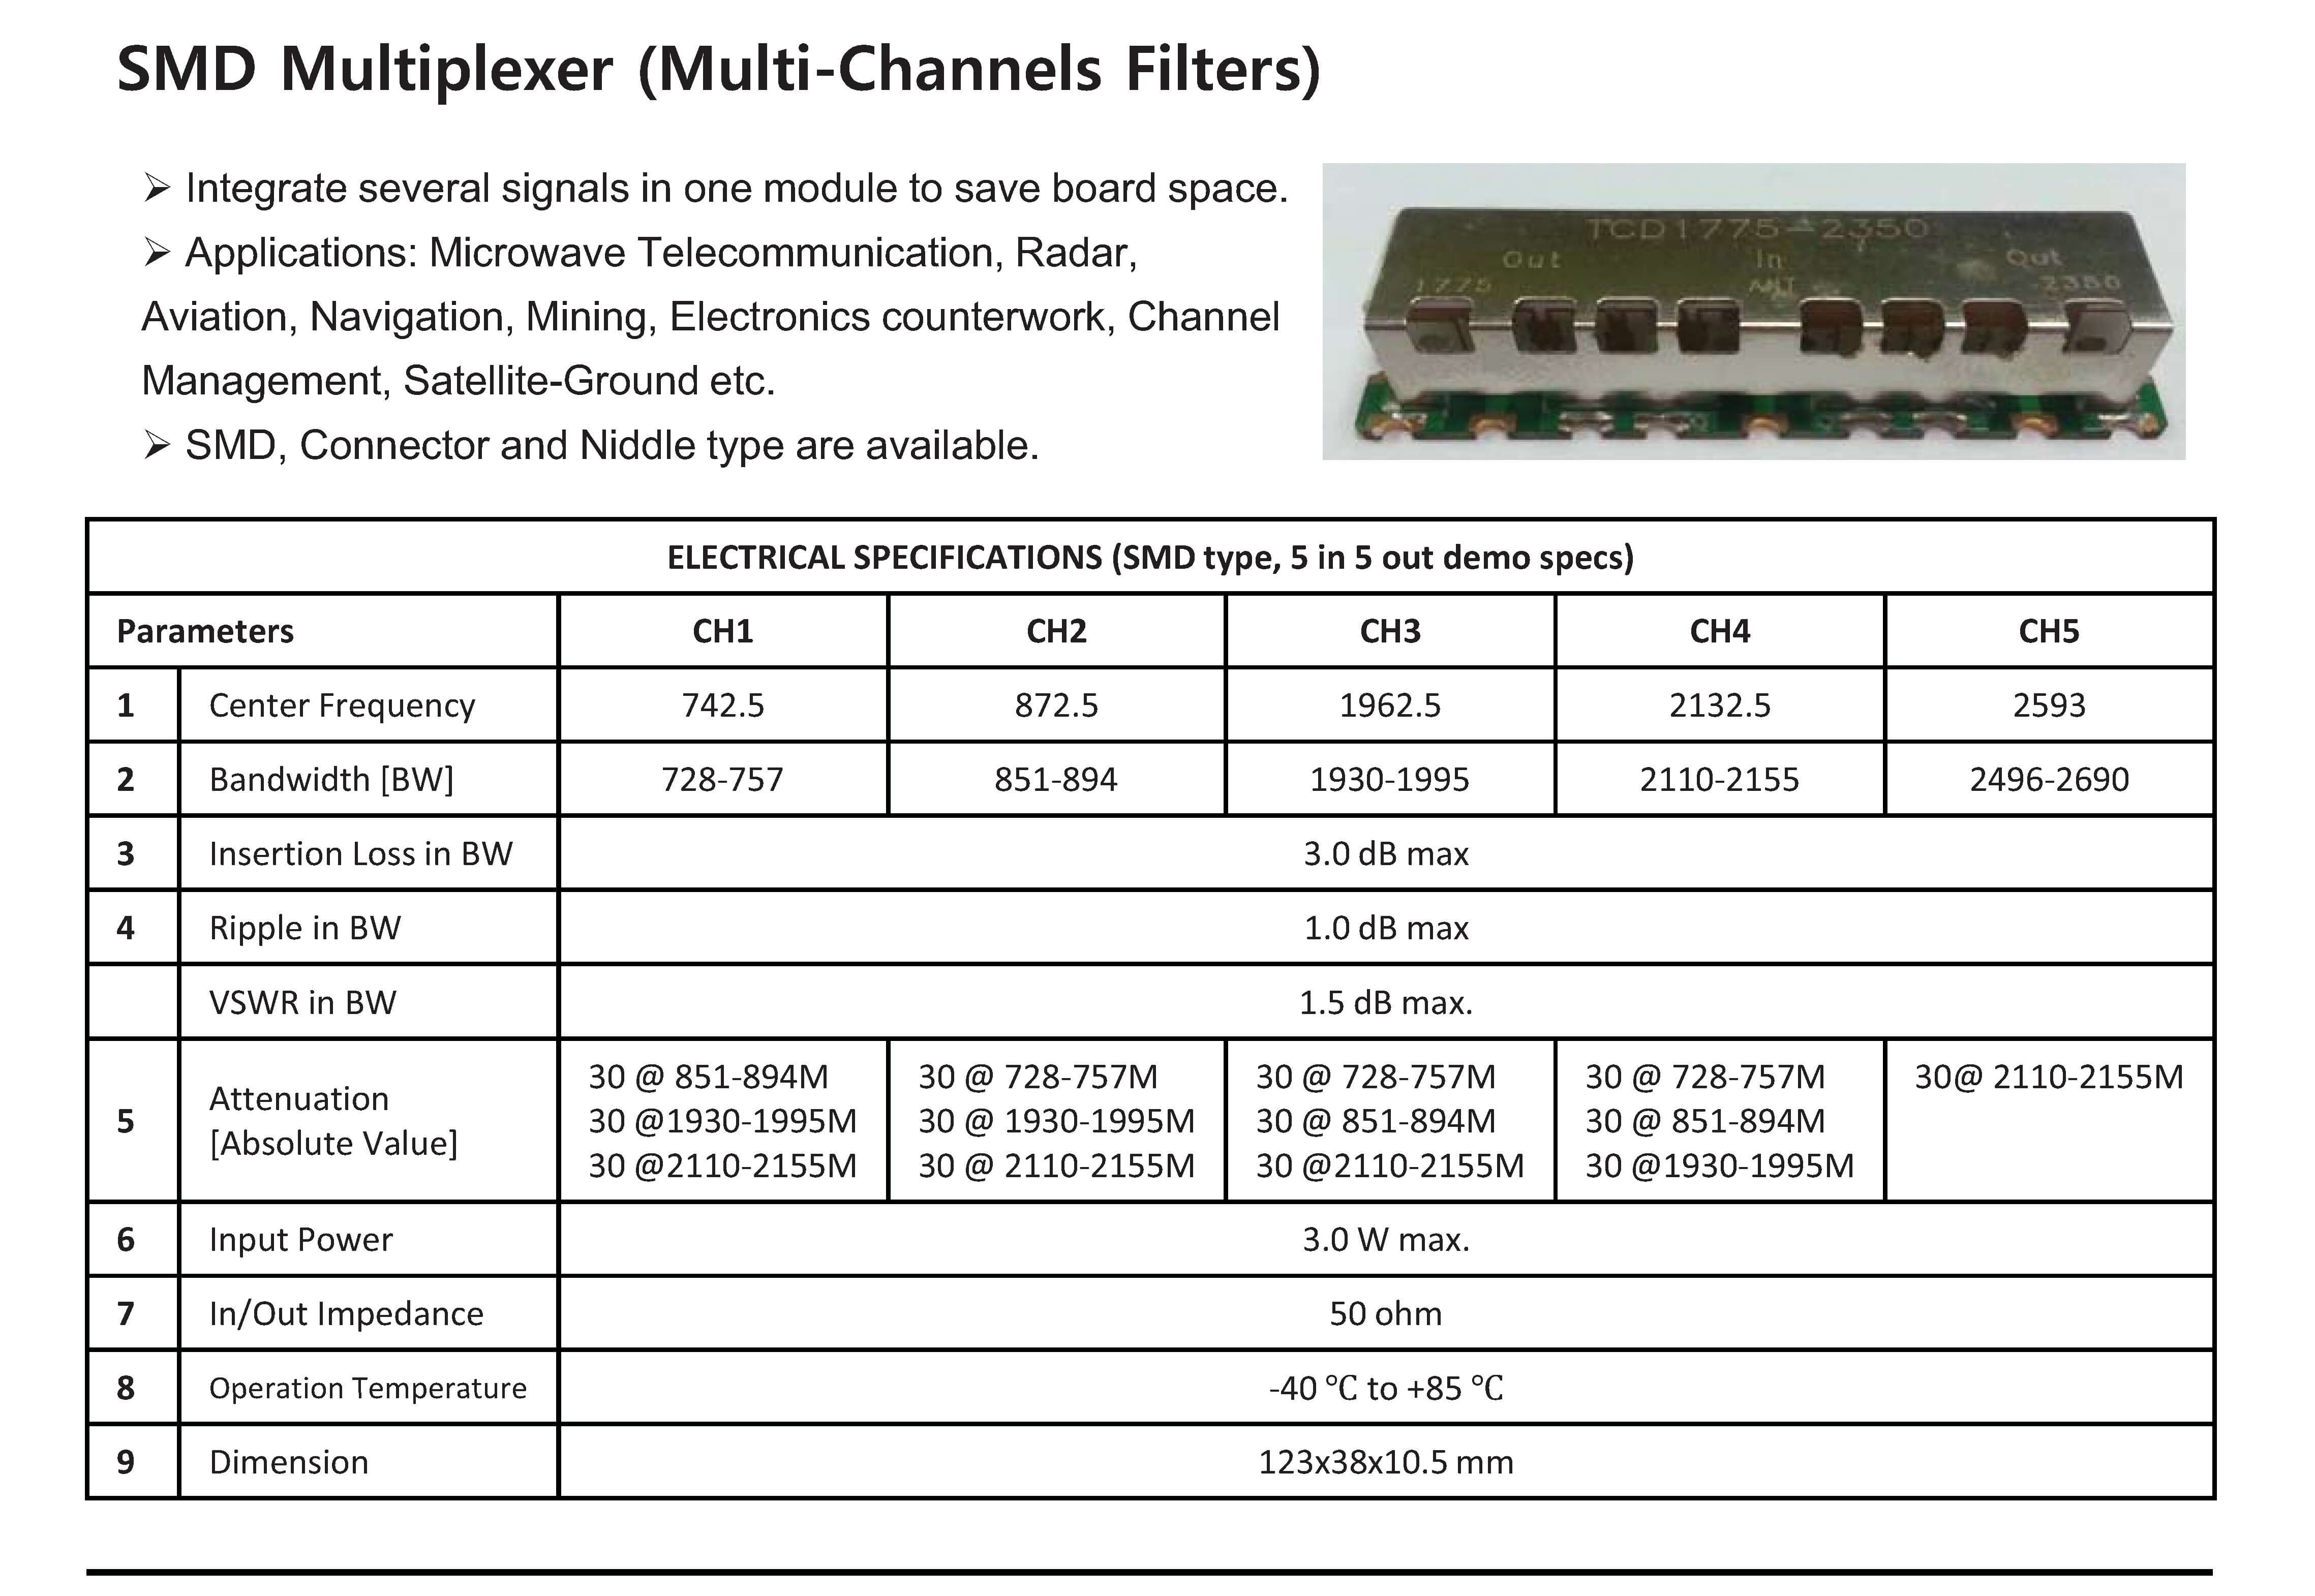 SMD Multiplexer (Multi-Channels Filters)